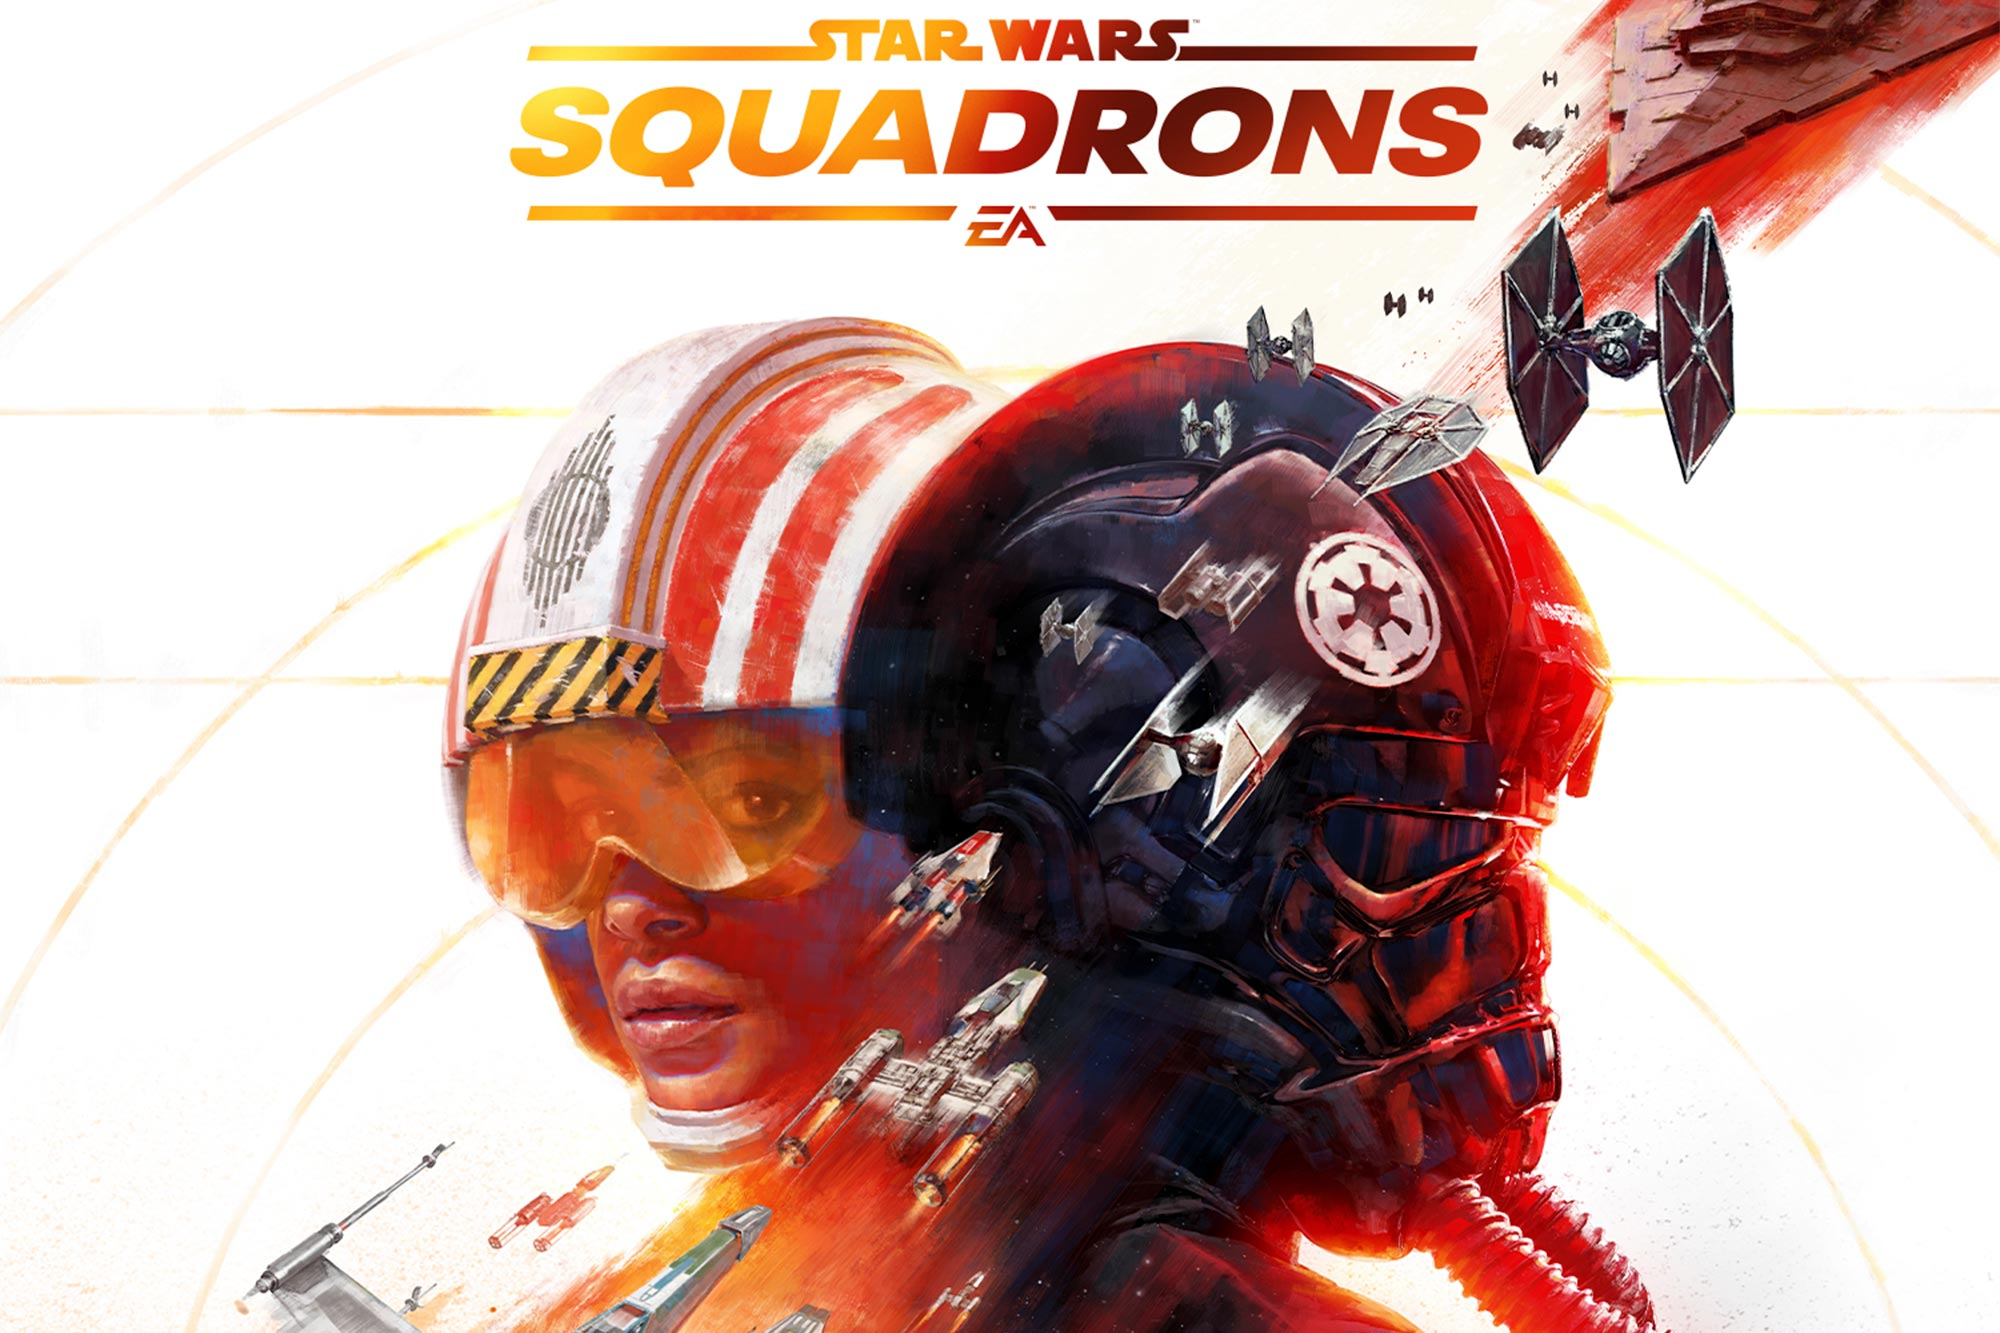 The new Star Wars game, Star Wars™: Squadrons, is now up for pre-order on Steam and Origin. - Star Wars, EA Games, Computer games, Pre-order, Origin, Steam, Video, Longpost, Star Wars: Squadrons